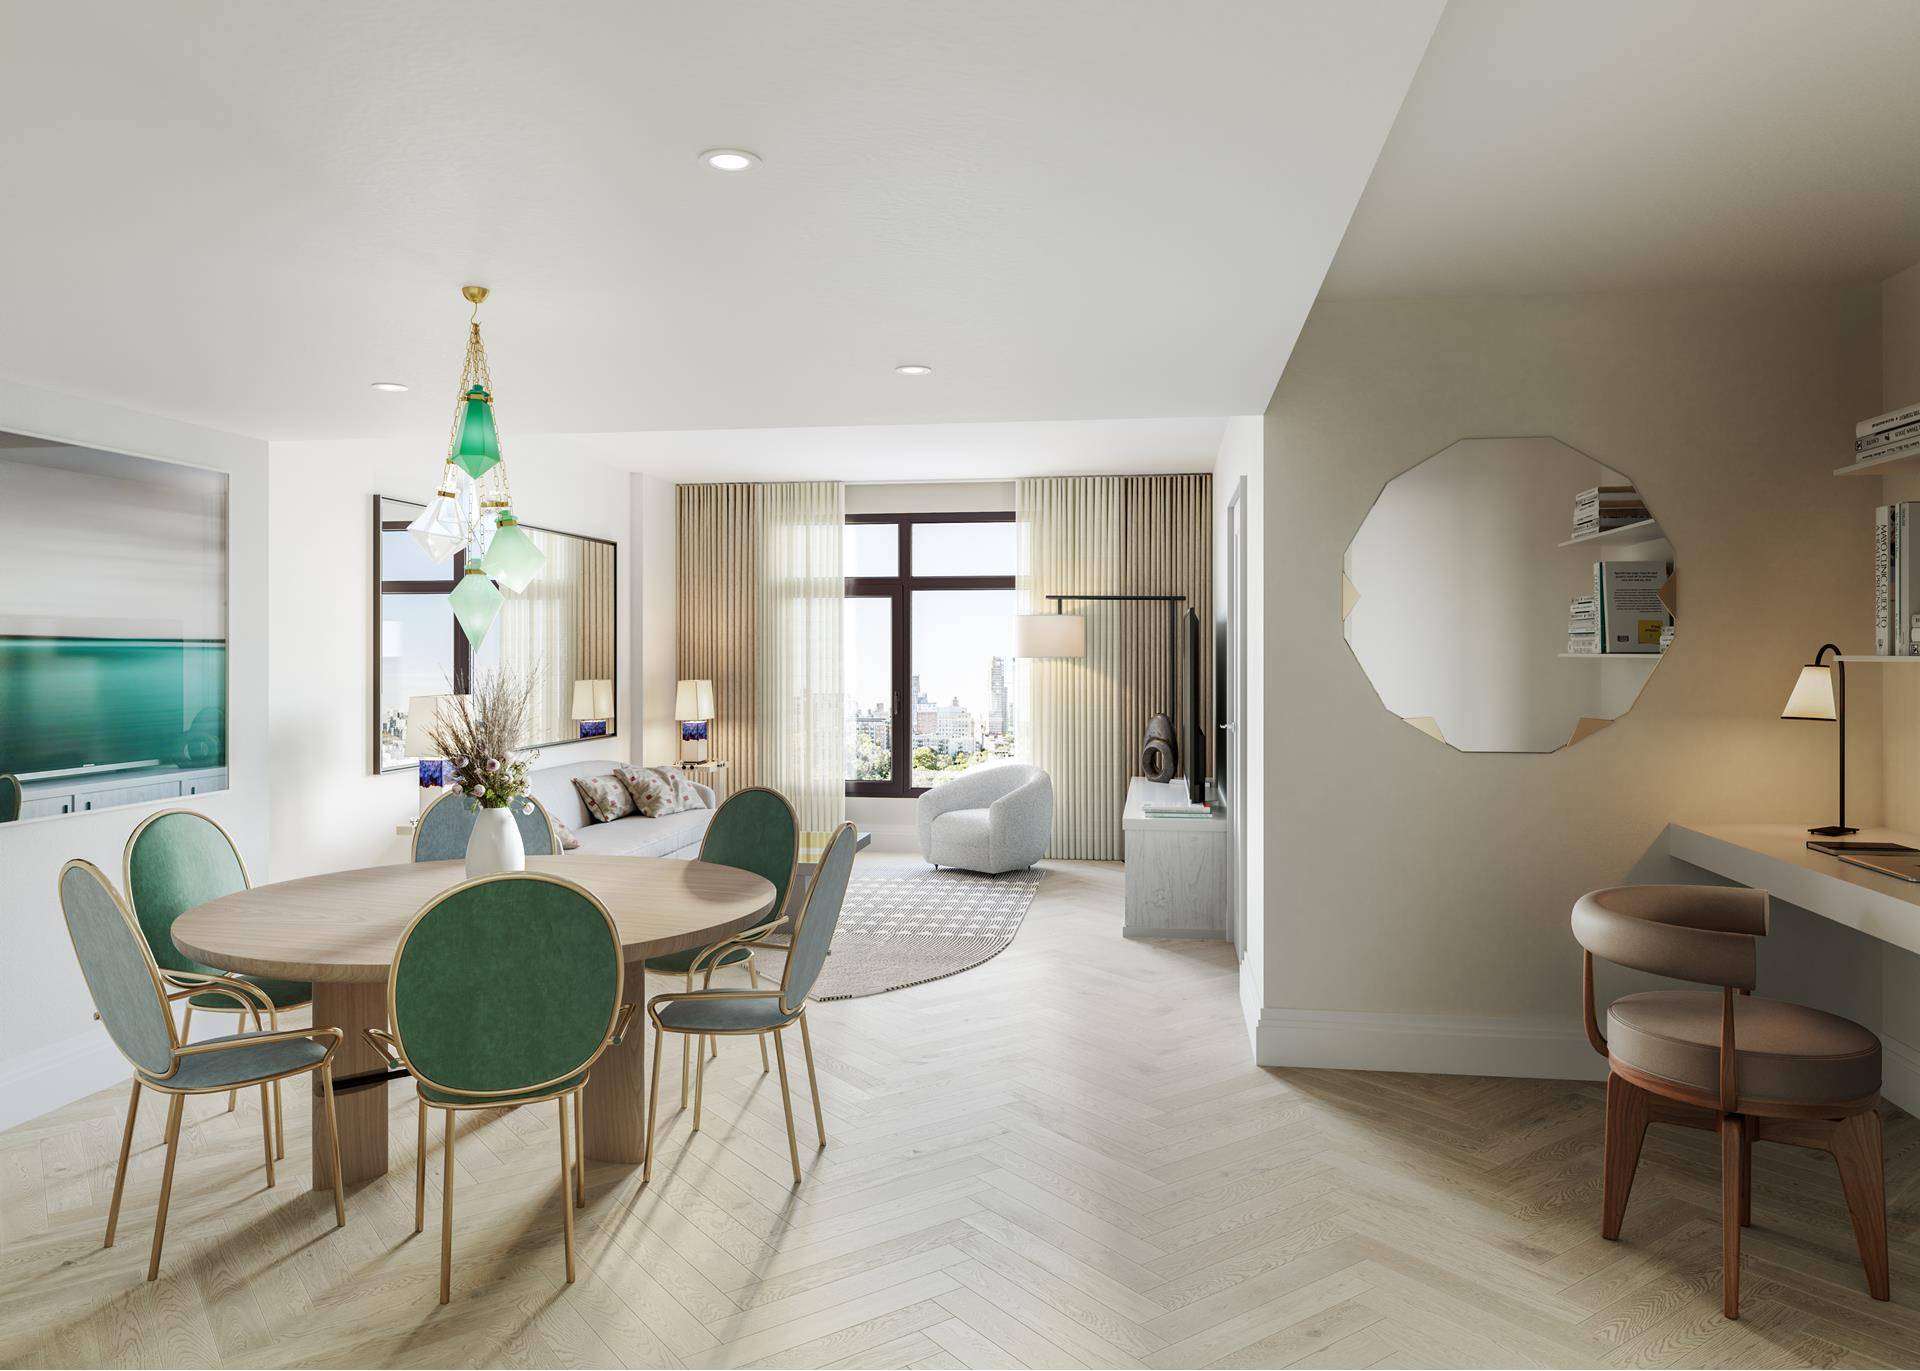 Sales Gallery Now Open By Appointment Introducing residence 8D at 300 West, an east facing studio offering an open concept living area that boasts custom White Oak herringbone flooring, central ...